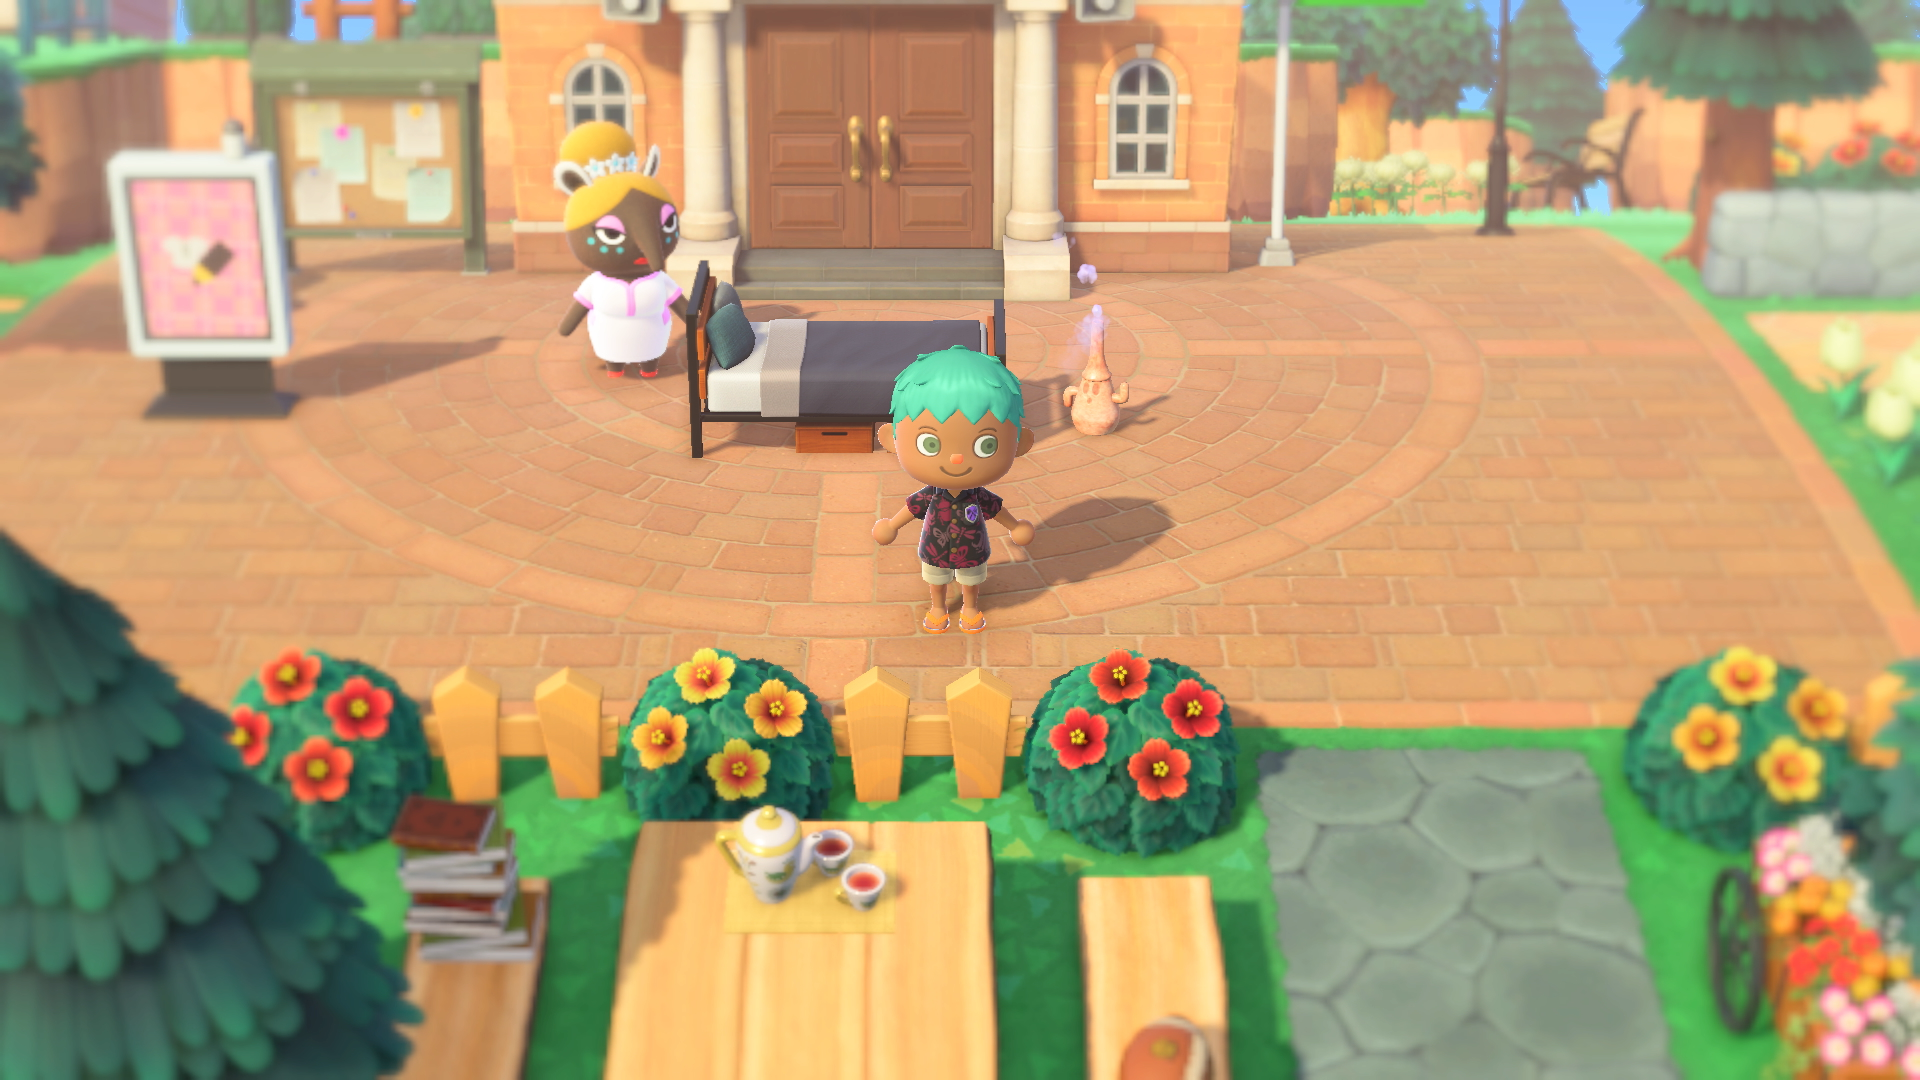 Dreaming With Luna How To Visit Dream Suite Islands In Animal Crossing New Horizons,Brass And Nickel Decor